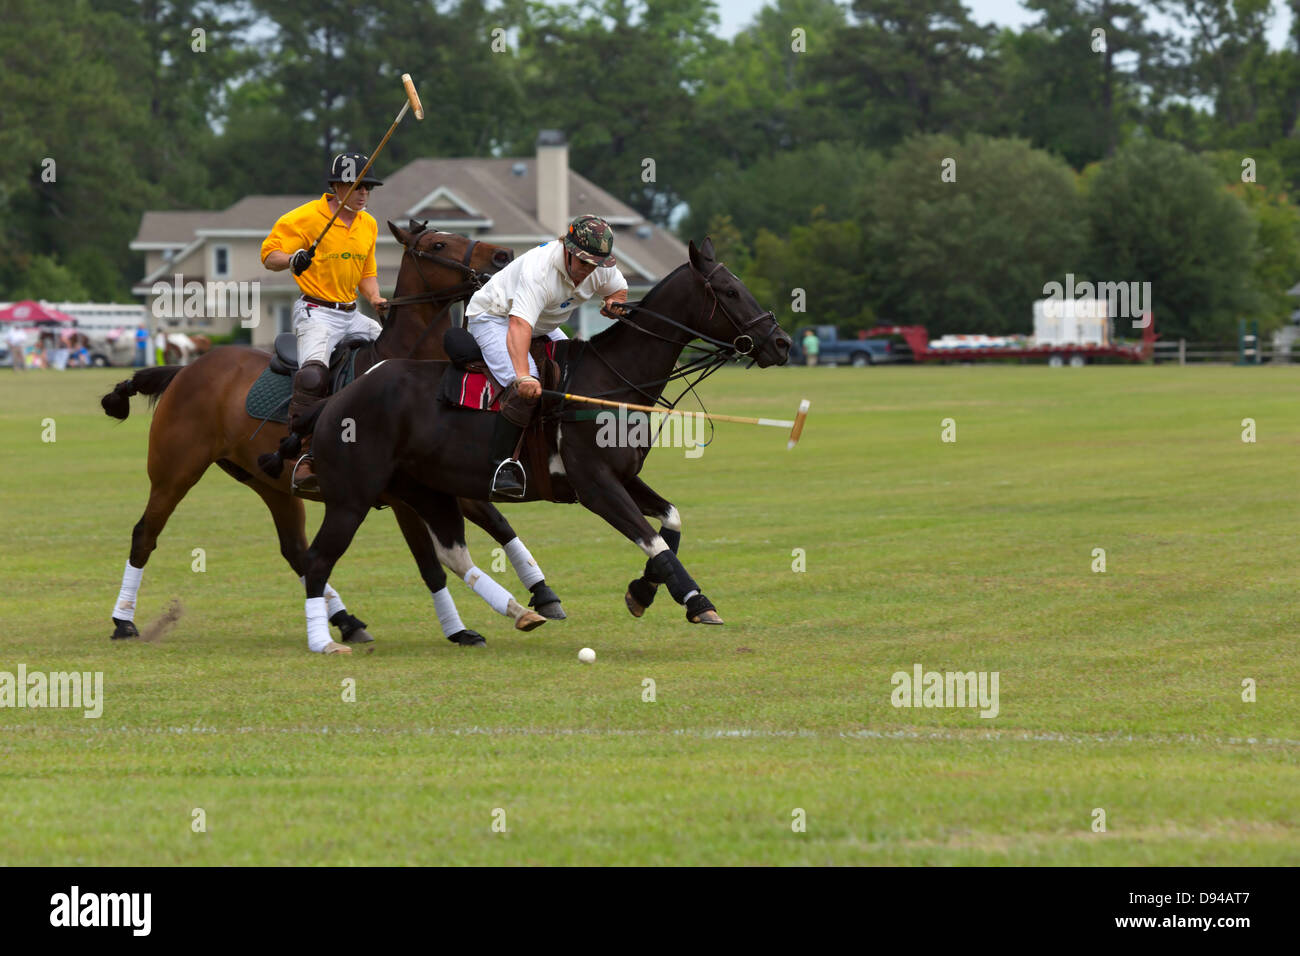 Defending player attempts to strike the ball with his mallet during a polo match. A member of the opposing team follows. Stock Photo